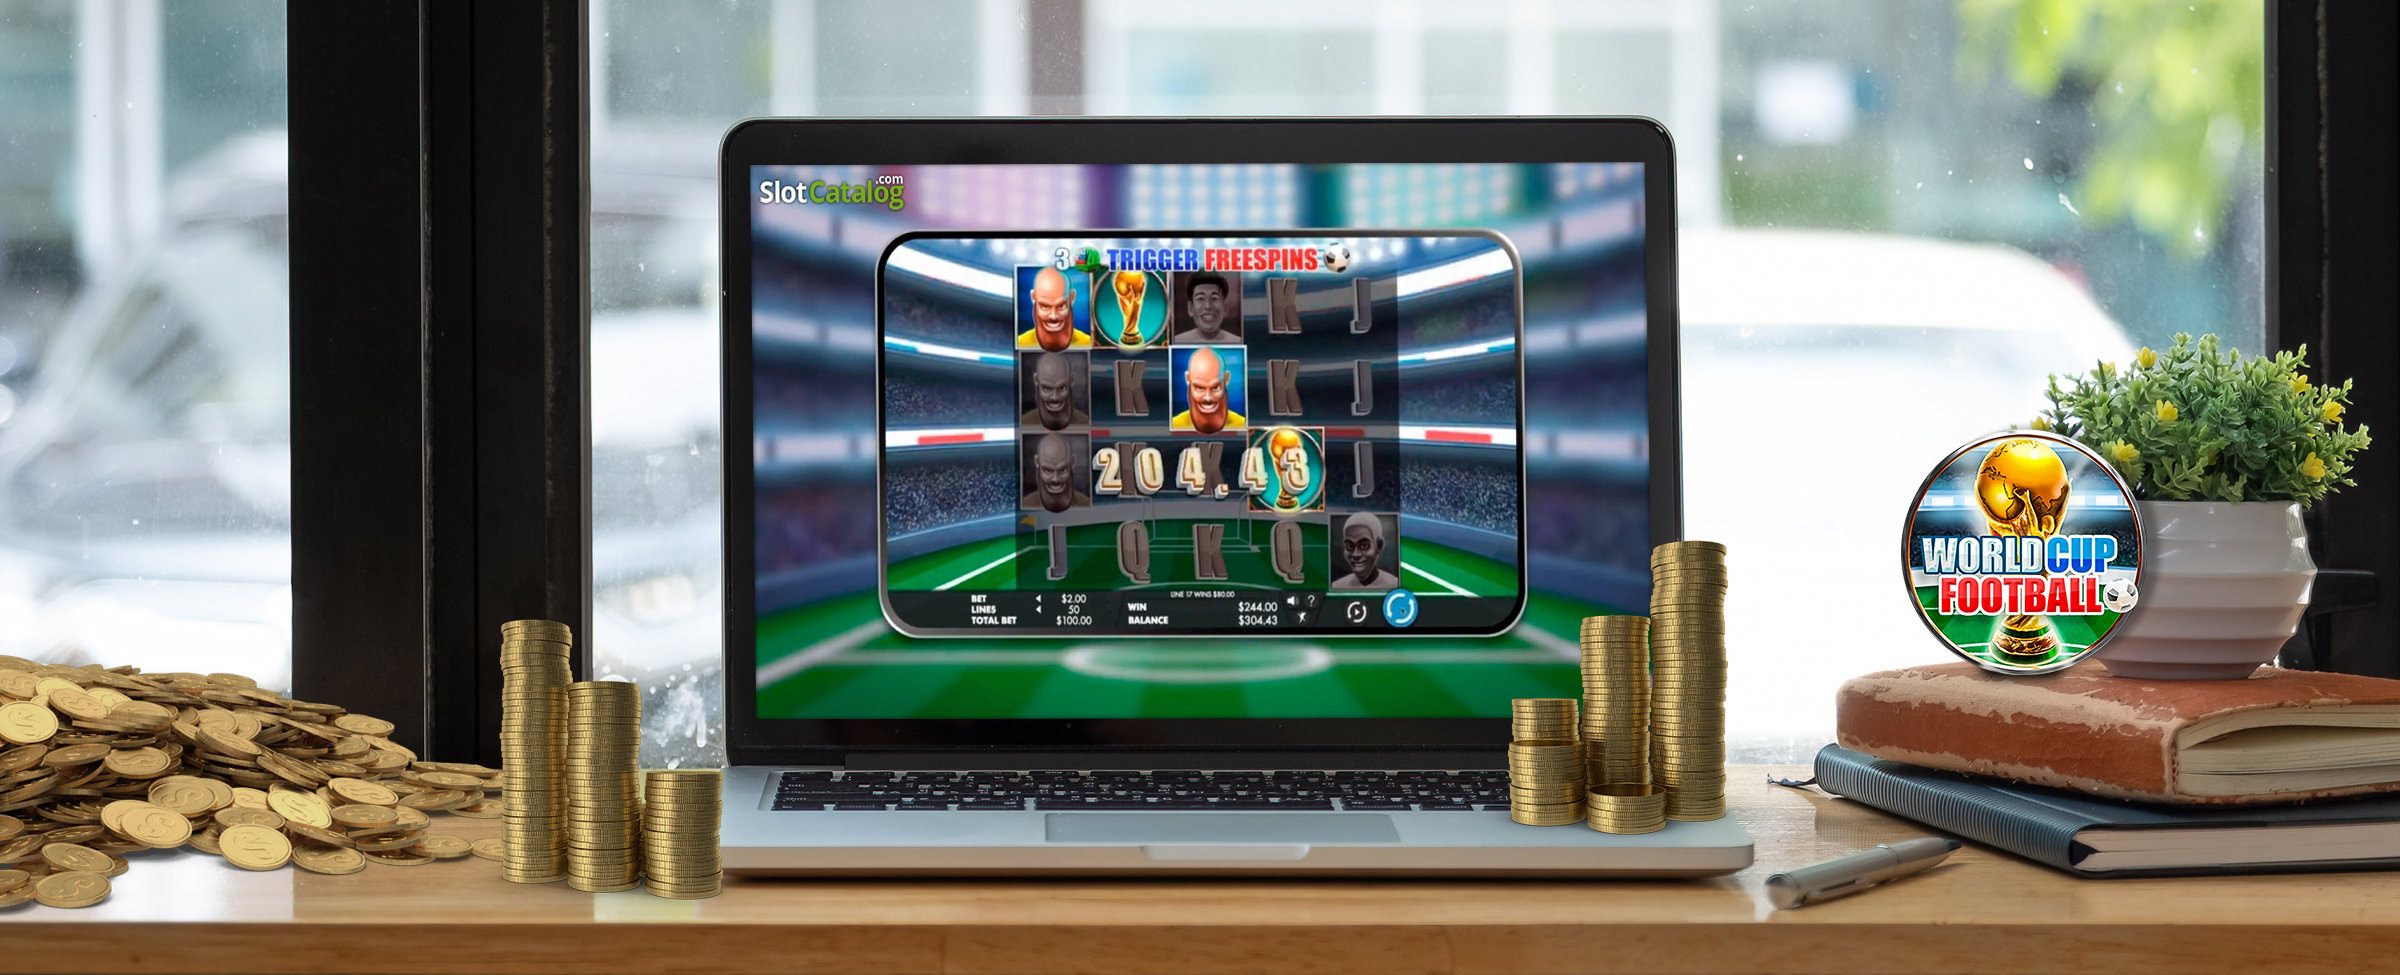 A wooden counter bench is pictured with a MacBook sitting on top, open, previewing the Cafe Casino slot game “World Cup Football”. Sitting on top of the laptop’s keypad is a stack of coins, sitting next to two books propping up a small plant. Over on the left is a pile of gold coins.